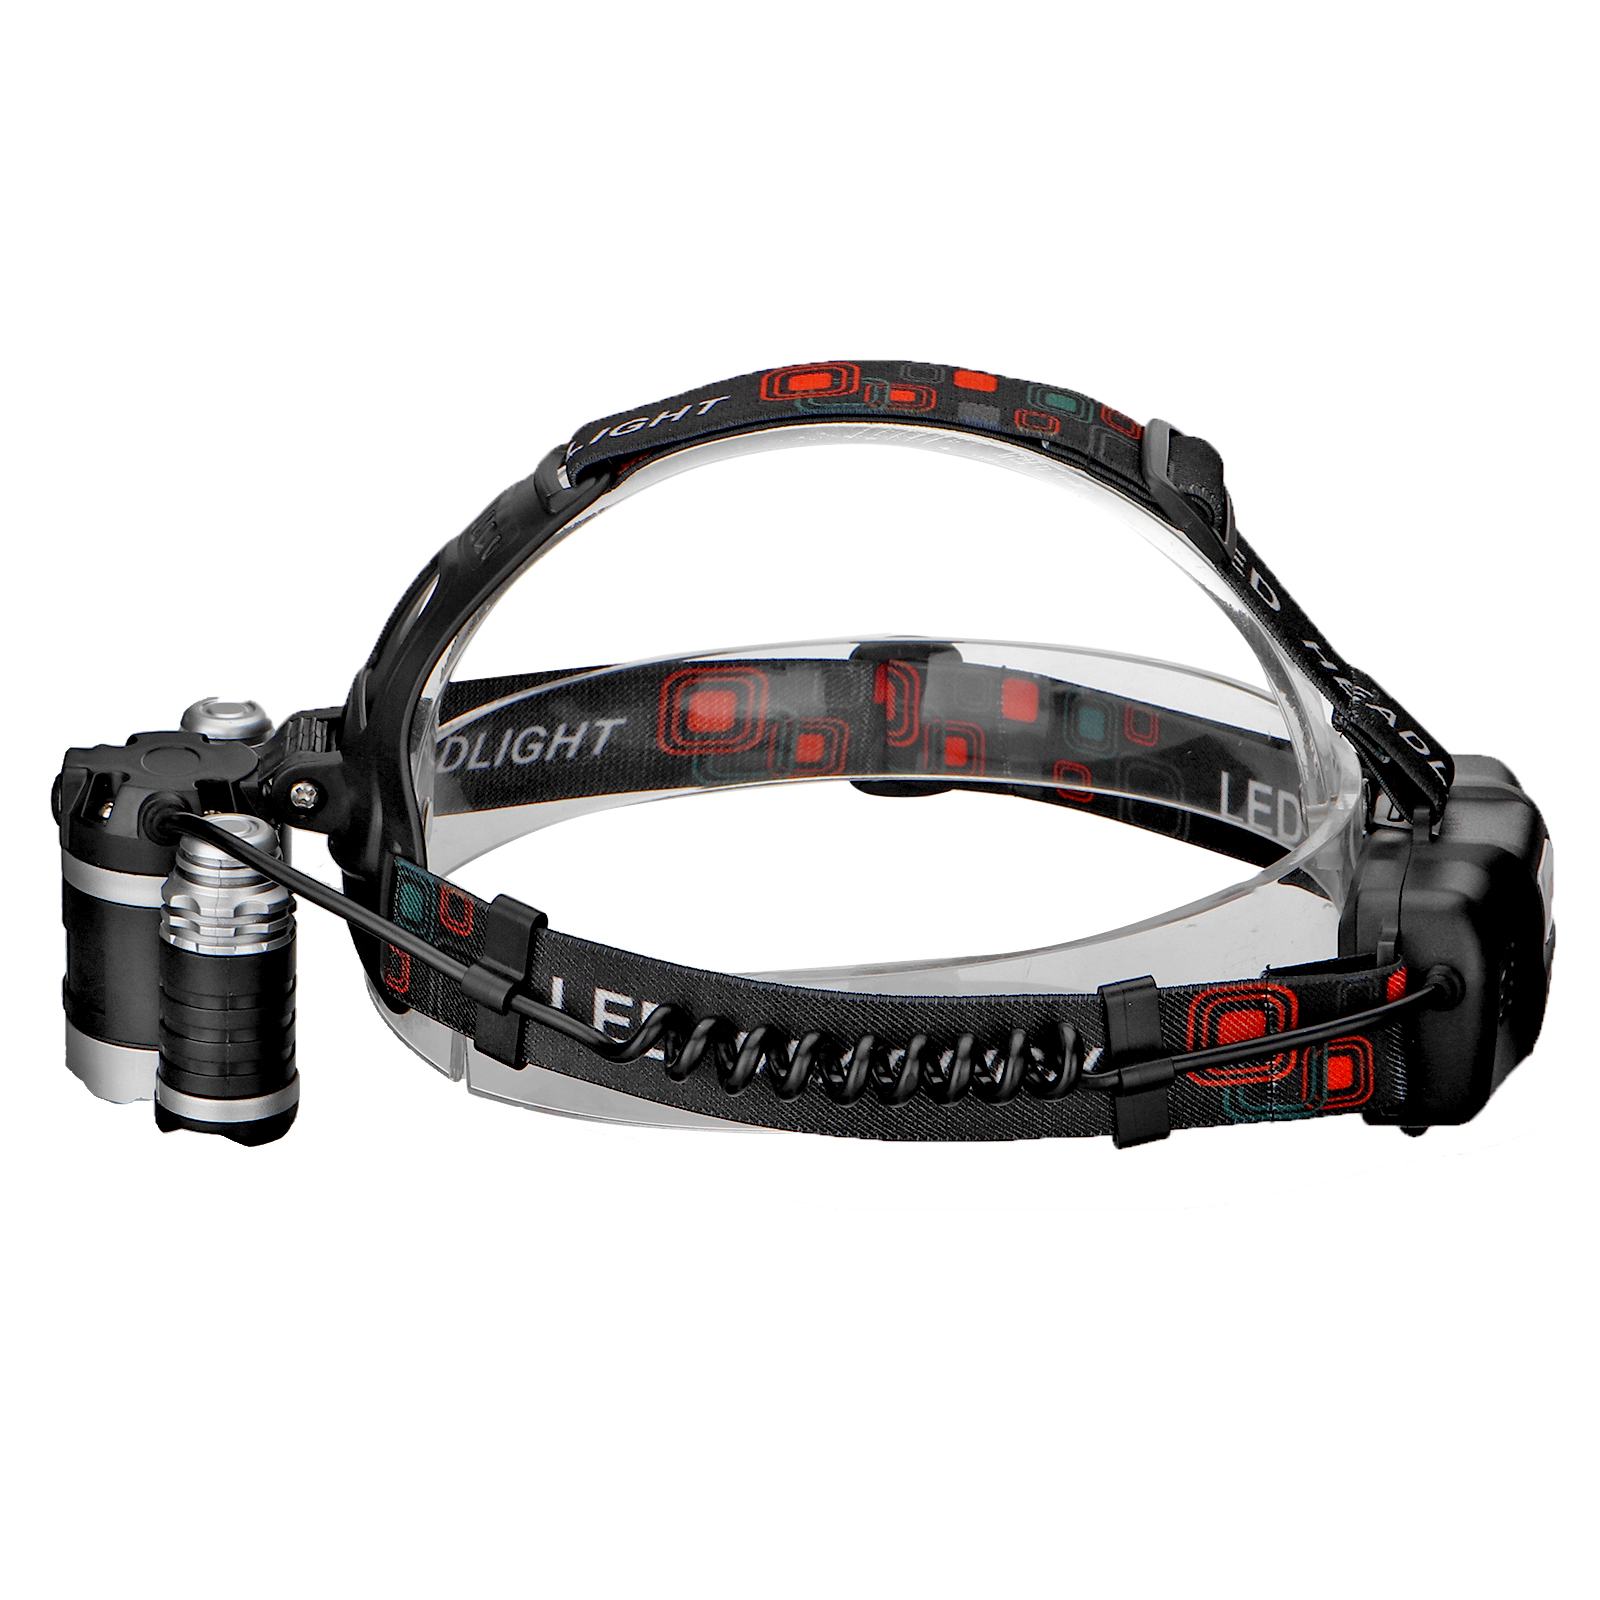 Find OUTERDO USB Rechargeable Headlamp 6400mAh IP65 Waterproof Outdoor Headlight 4 Light Modes for Sale on Gipsybee.com with cryptocurrencies